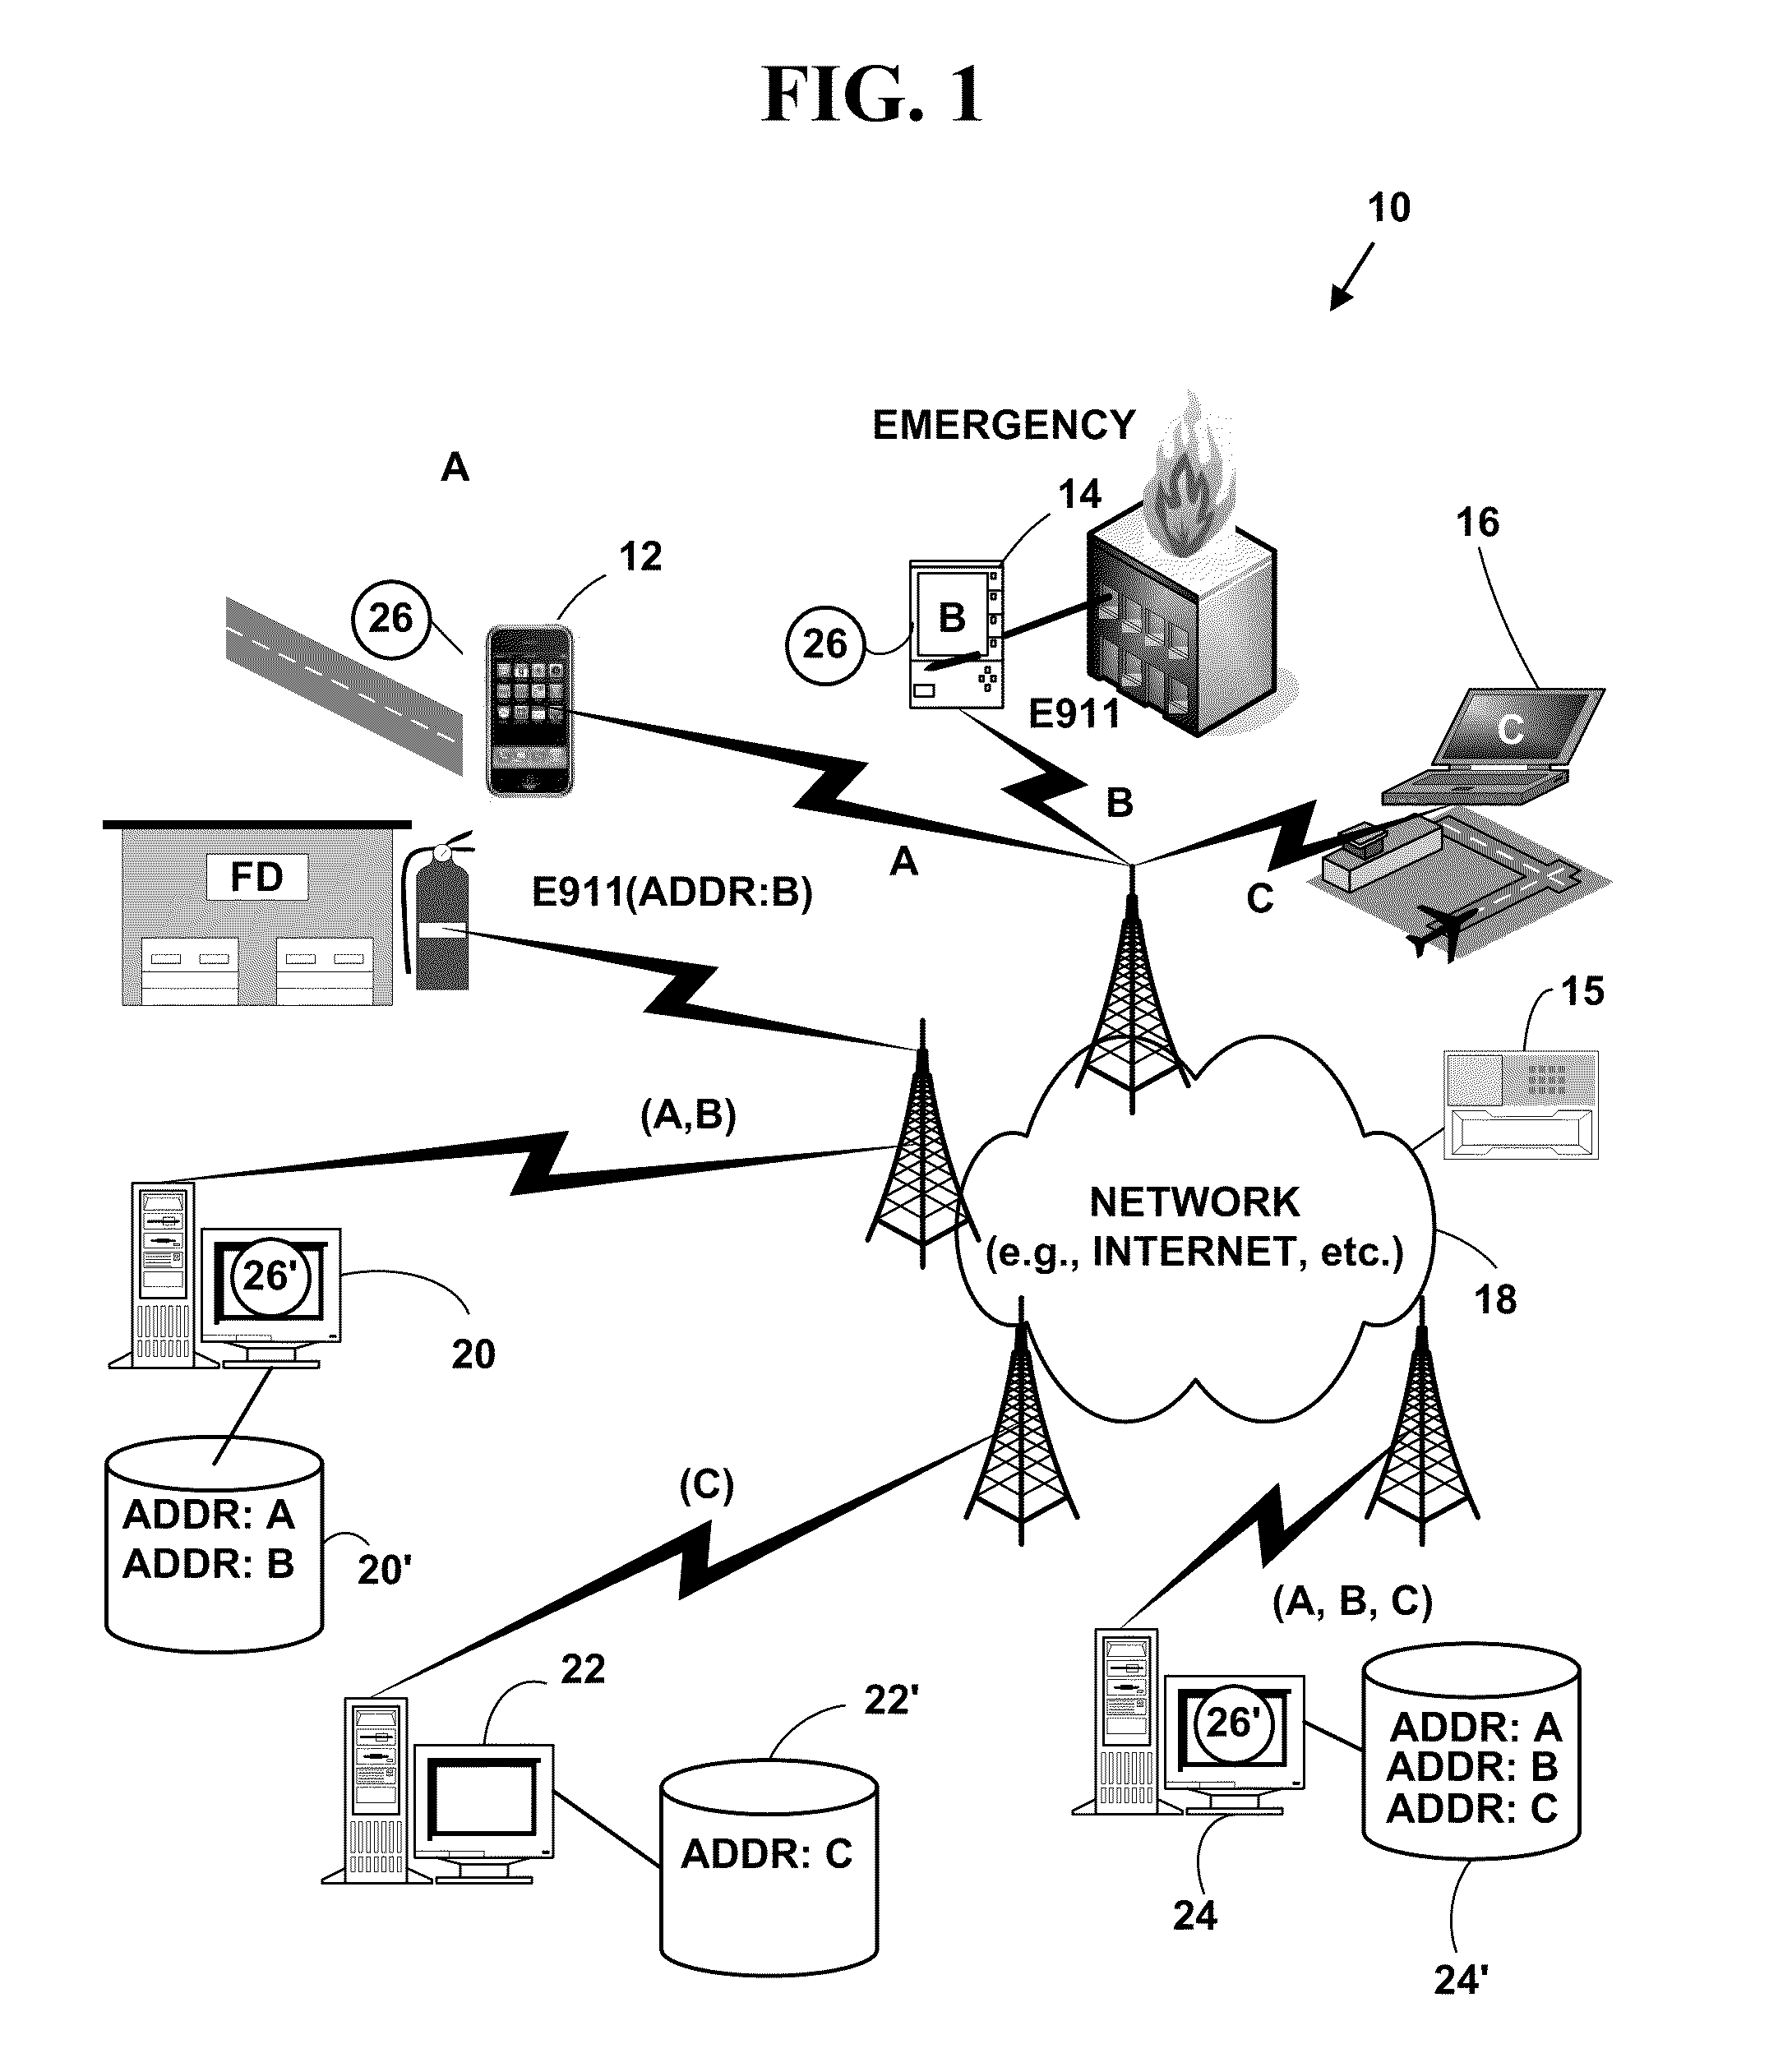 Method and system for an emergency location information service (e-lis)